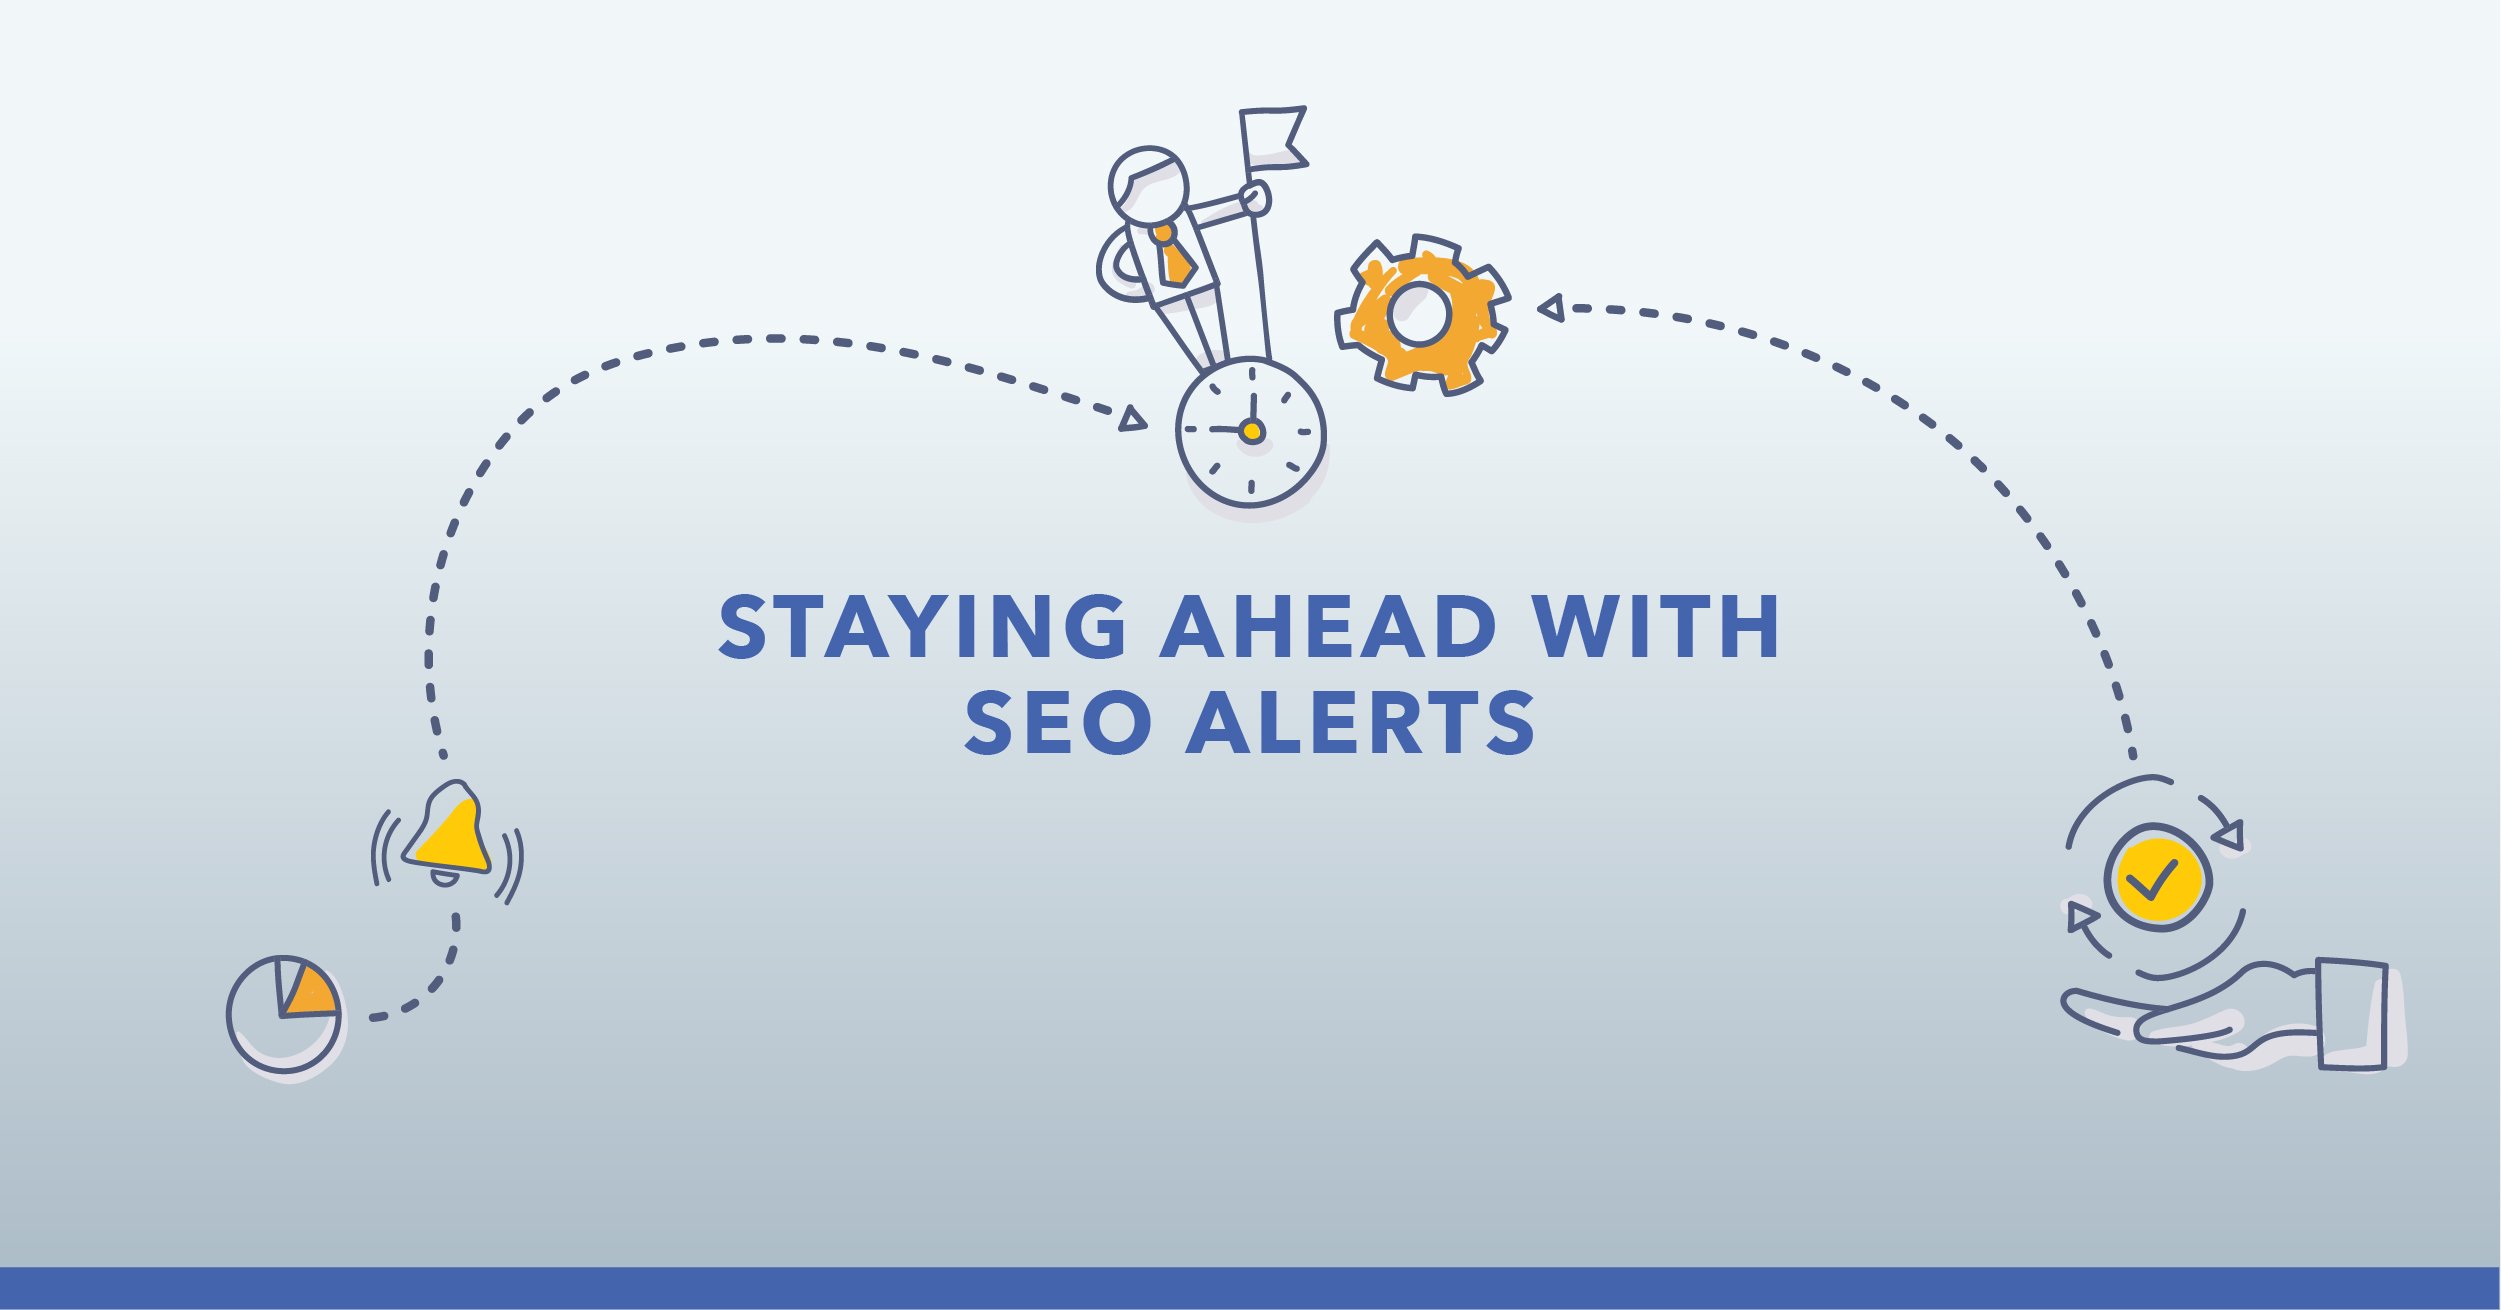 Don’t Fall Behind: SEO Alerts Help Stay On Top of Website Changes